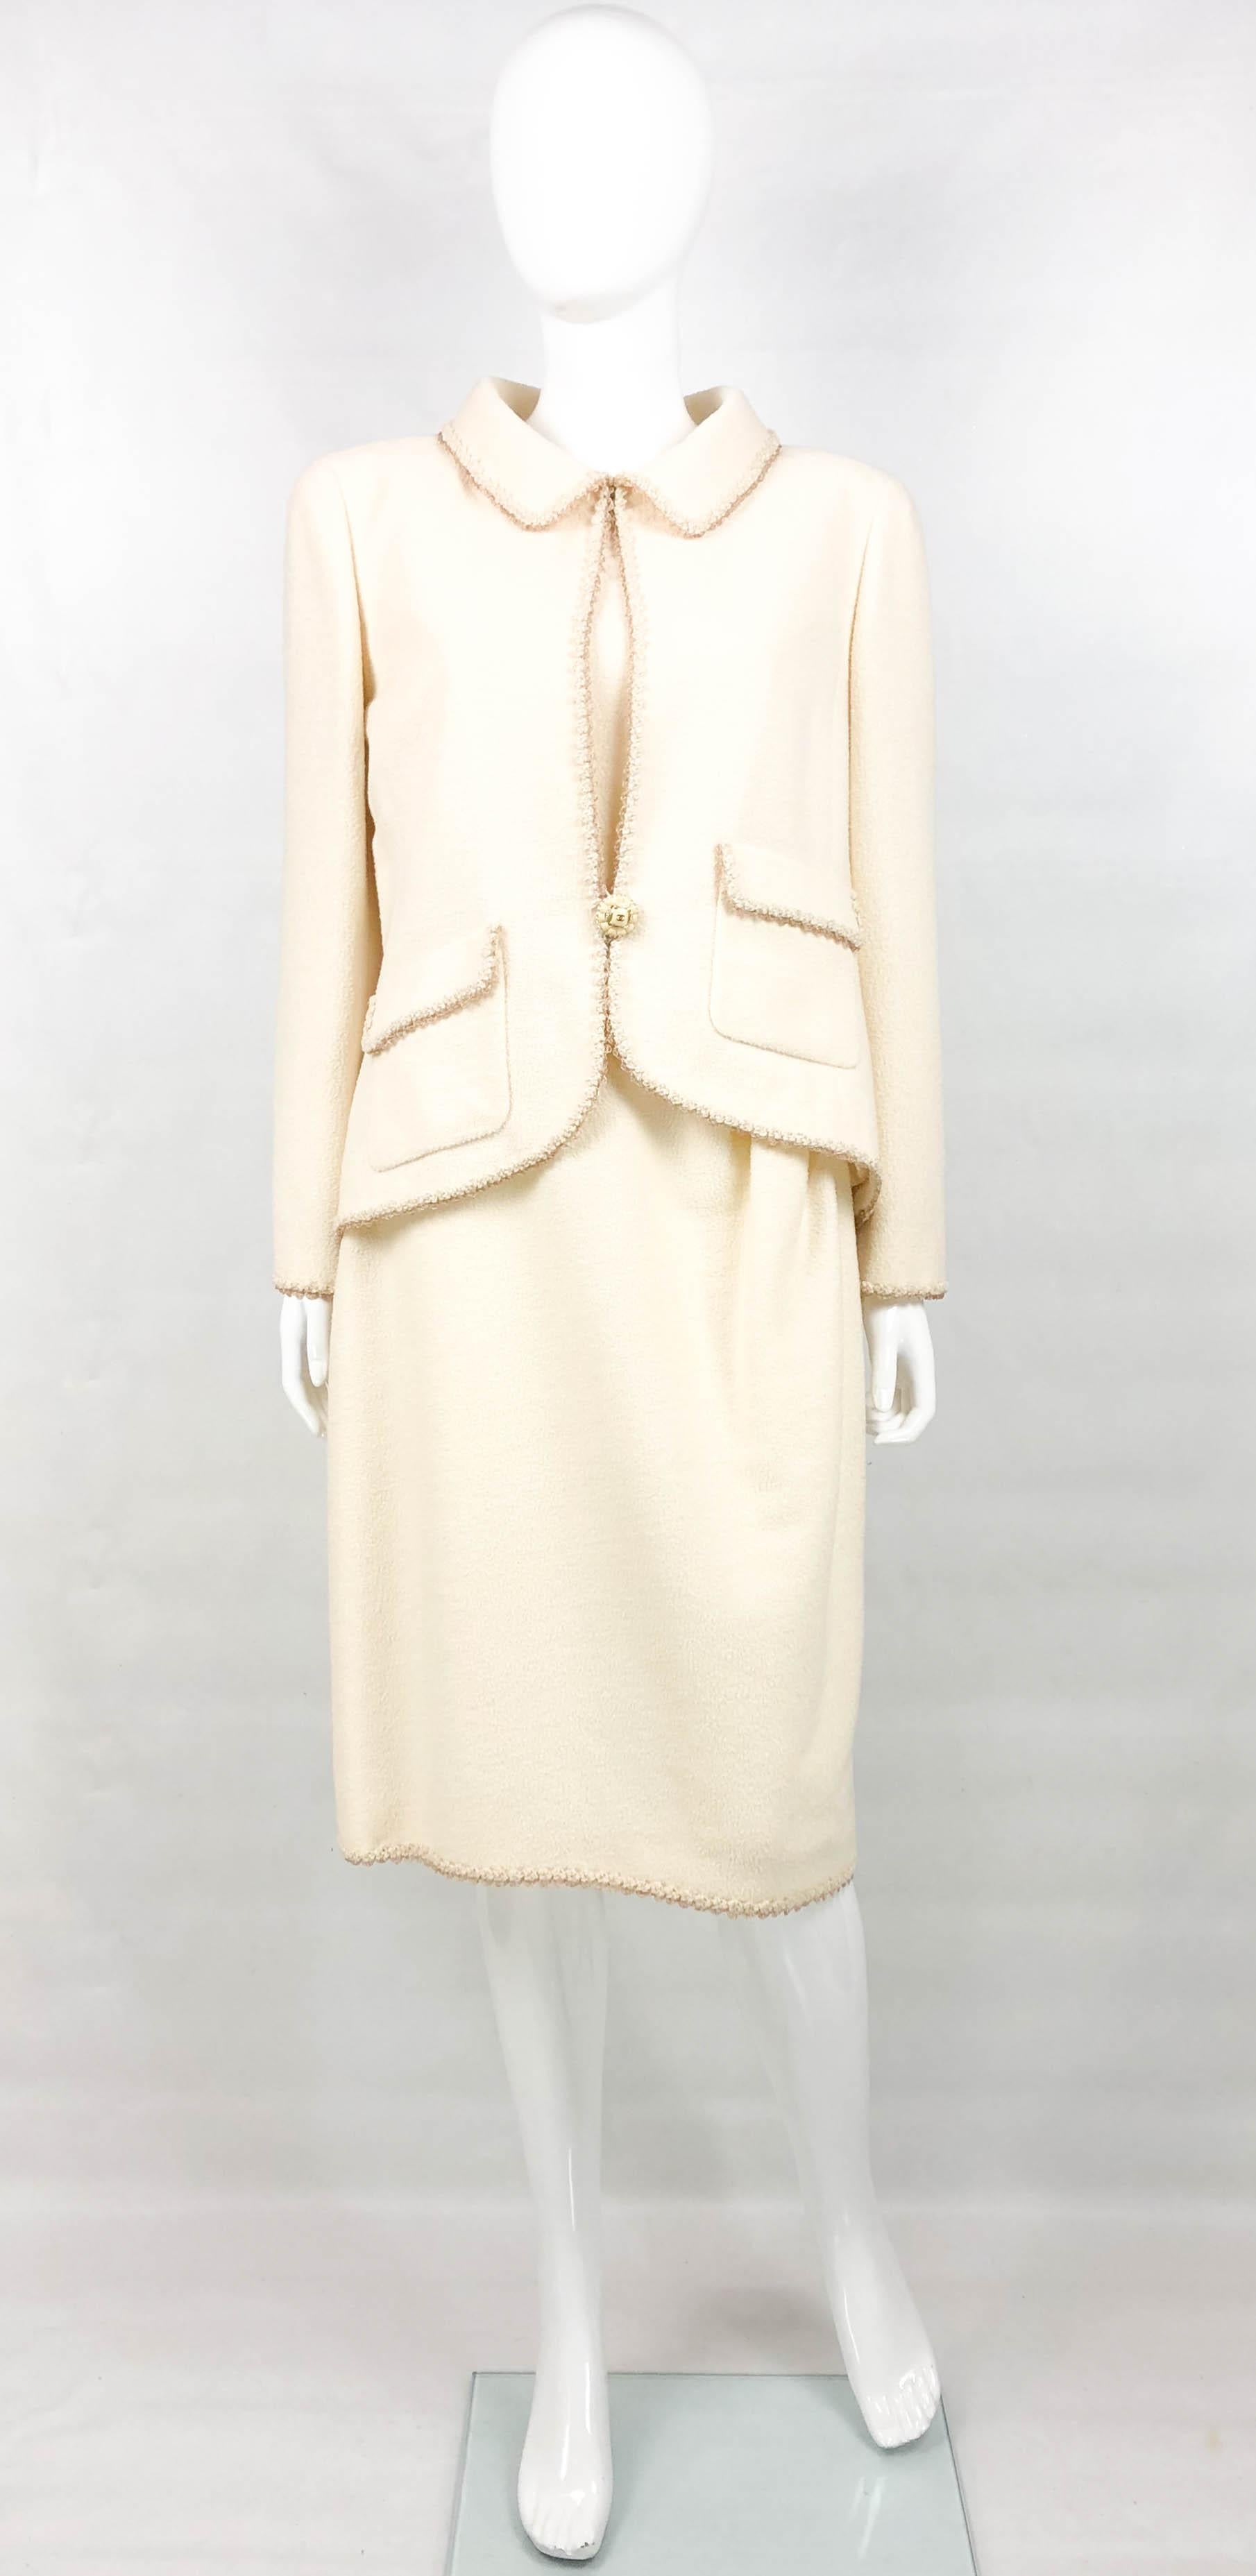 Chanel Runway Look Cream Wool Blend Jacket and Dress Ensemble. This beautiful cream ensemble by Chanel was created for the 2010 Cruise Collection. A model can be seen wearing an identical look on the runway (please refer to photos). The jacket